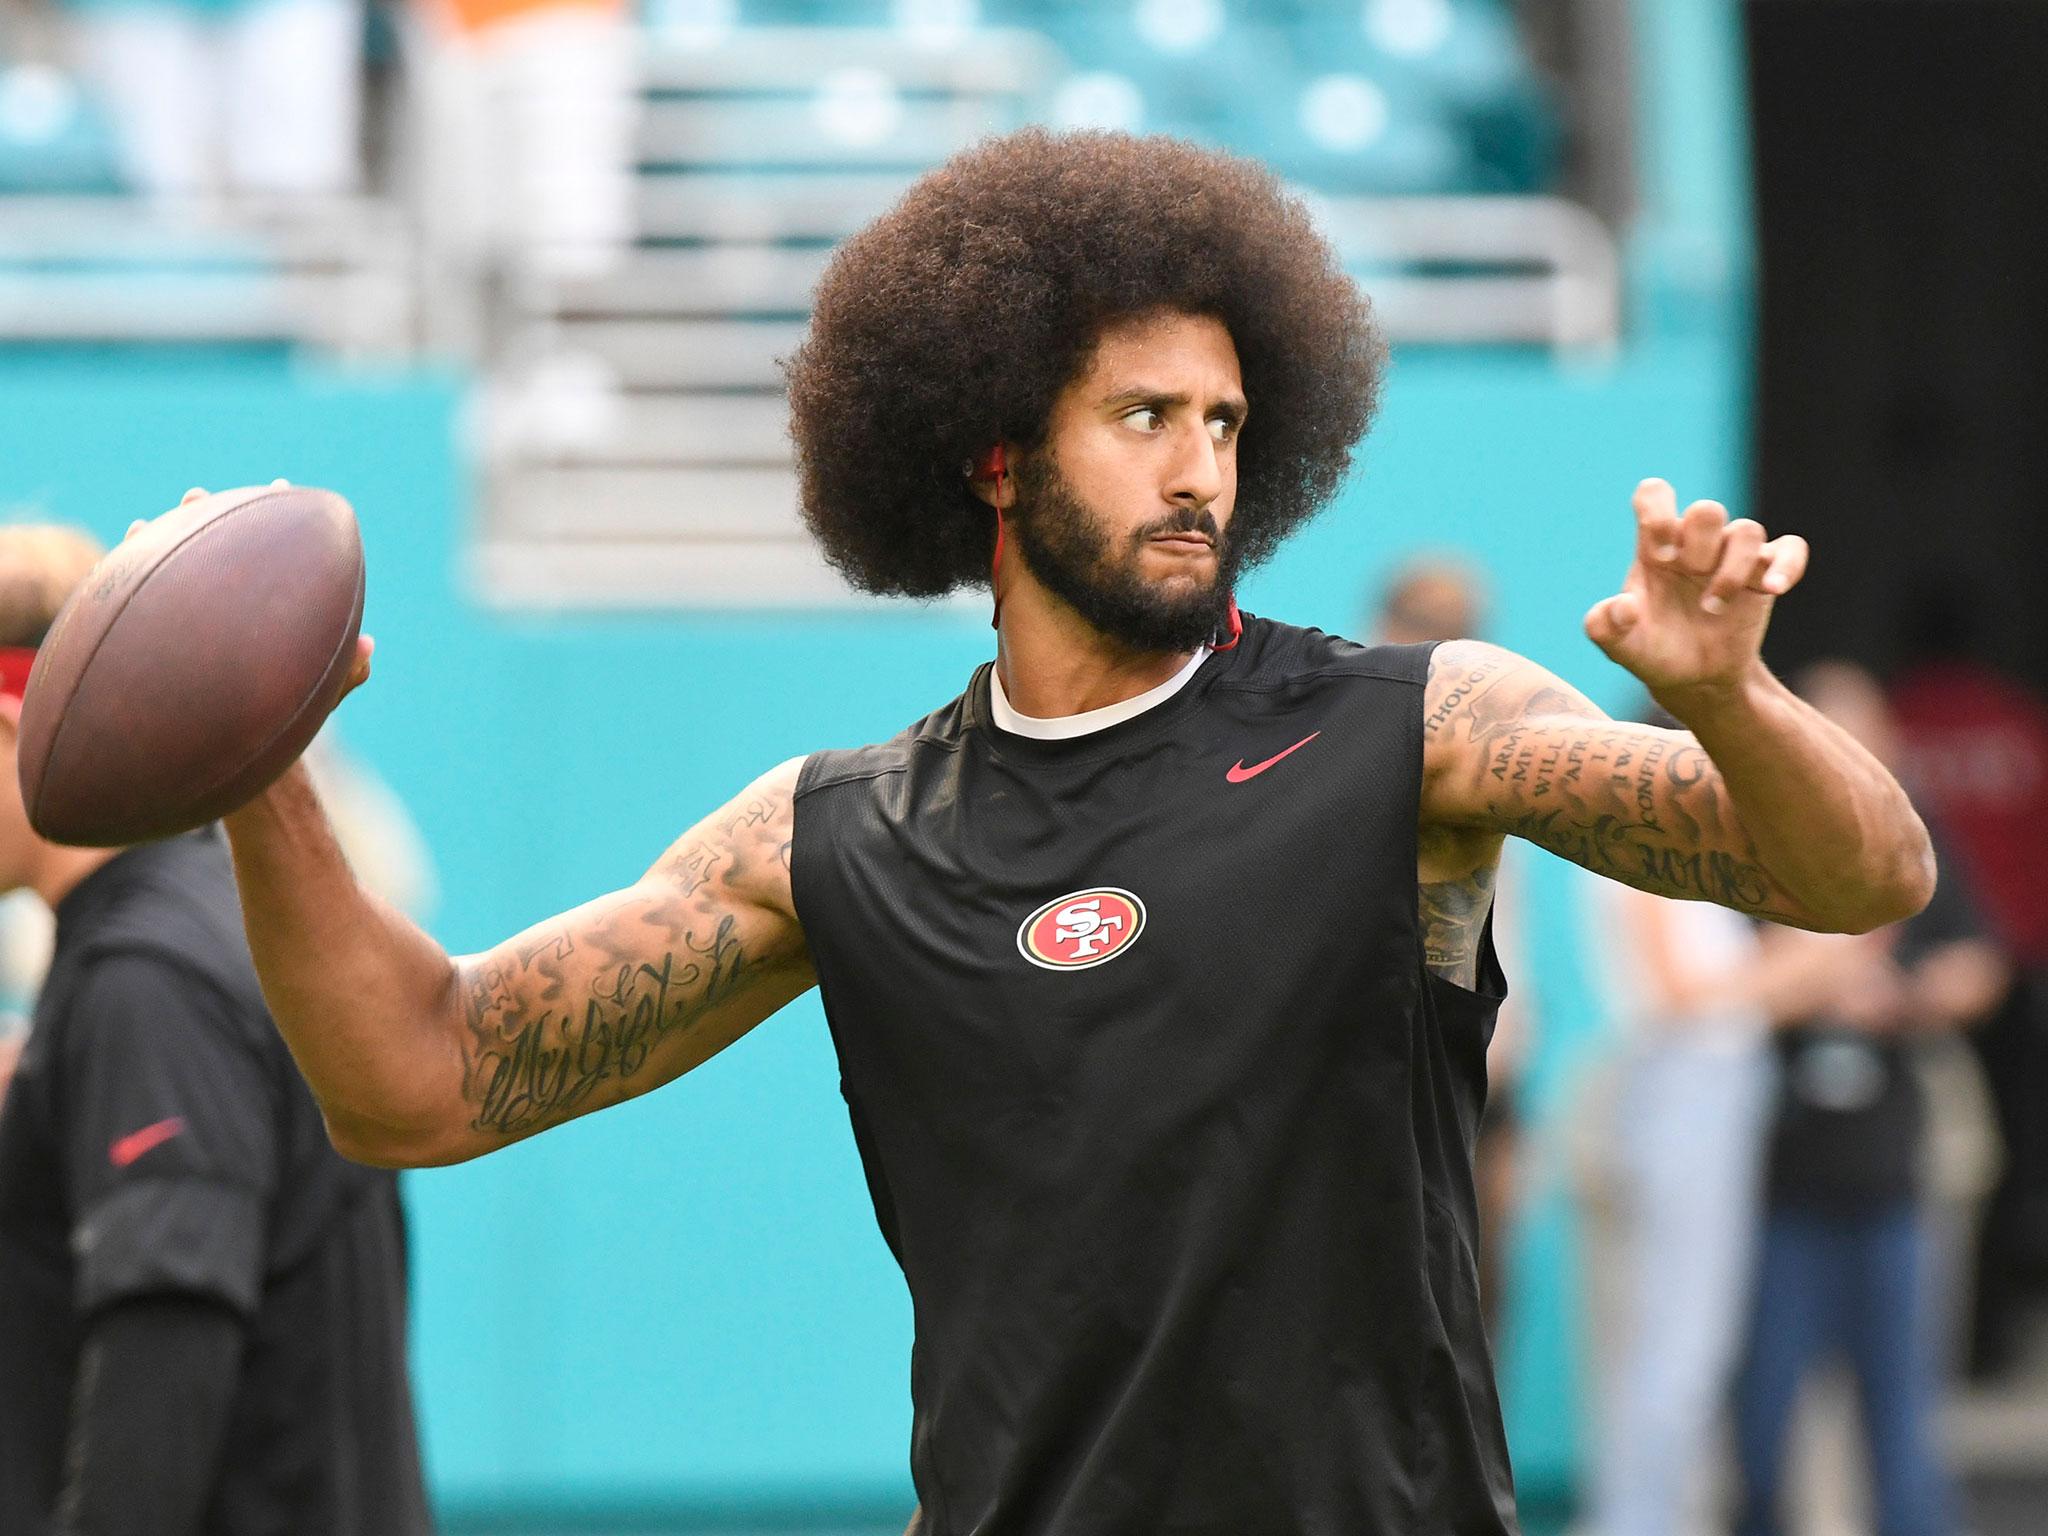 Colin Kaepernick has given $50,000 each to Meals on Wheels and the Love Army for Somalia campaign